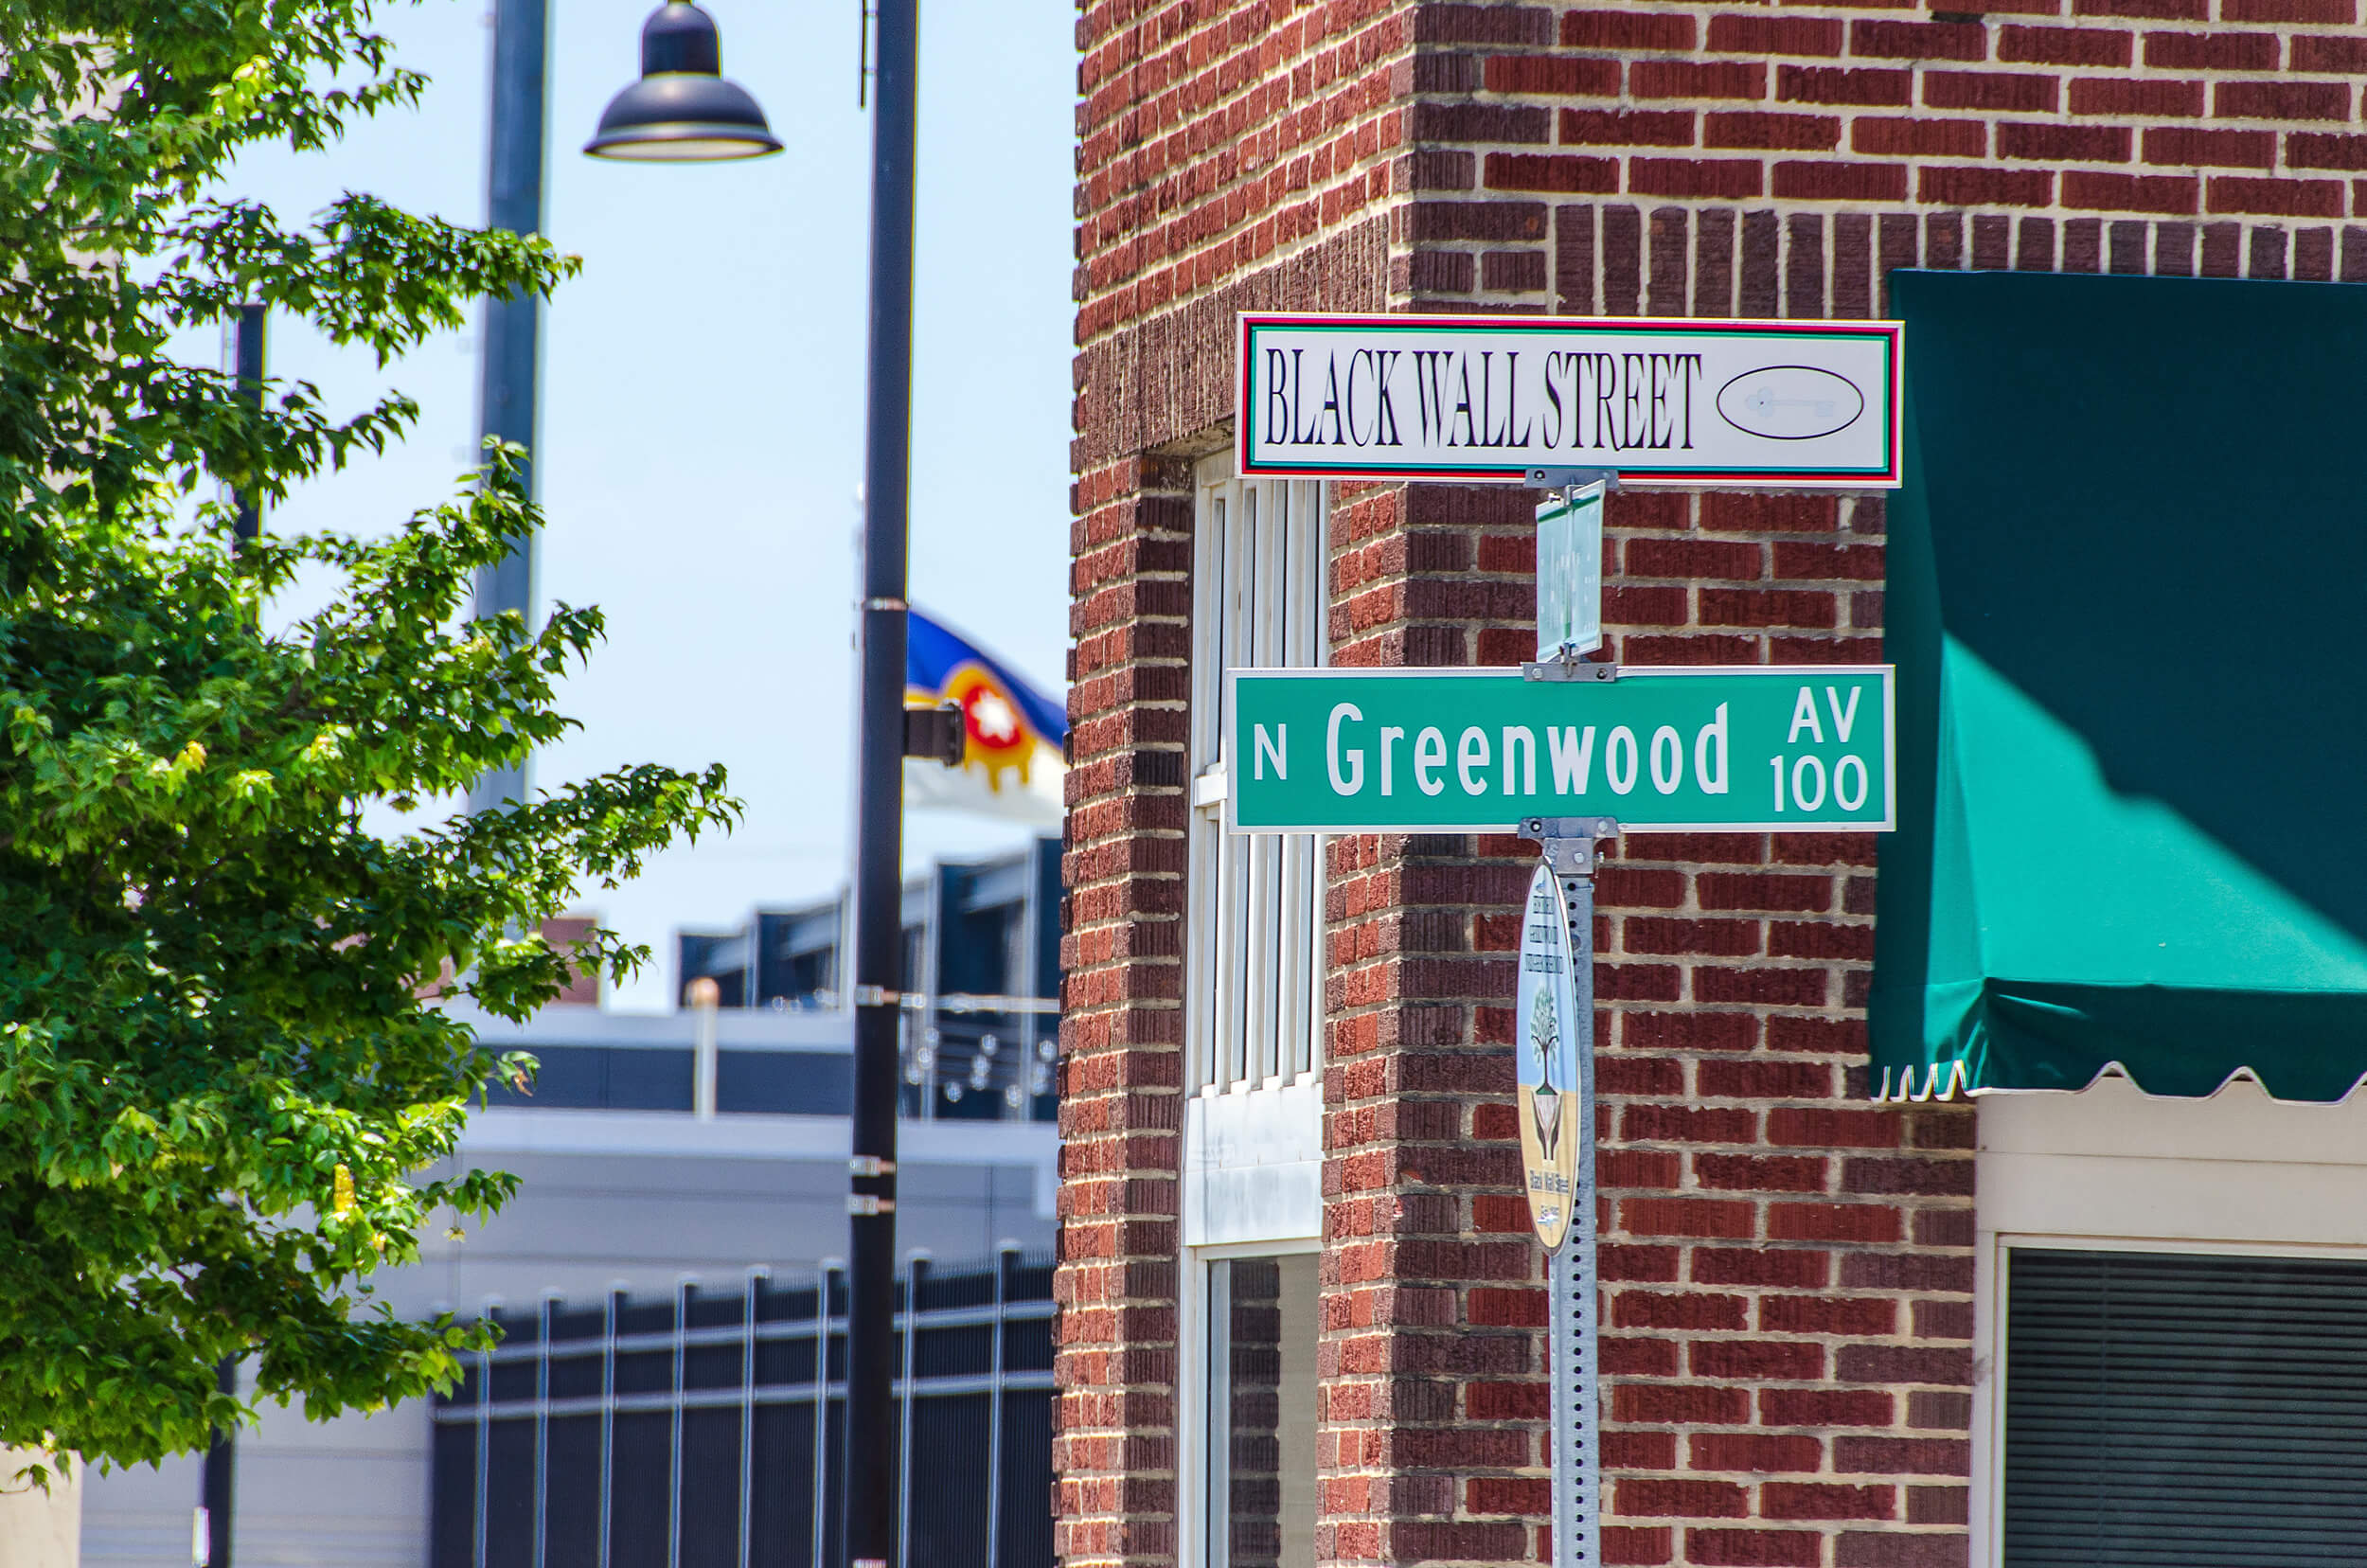 N. Greenwood Ave Street sign in downtown Tulsa, OK.